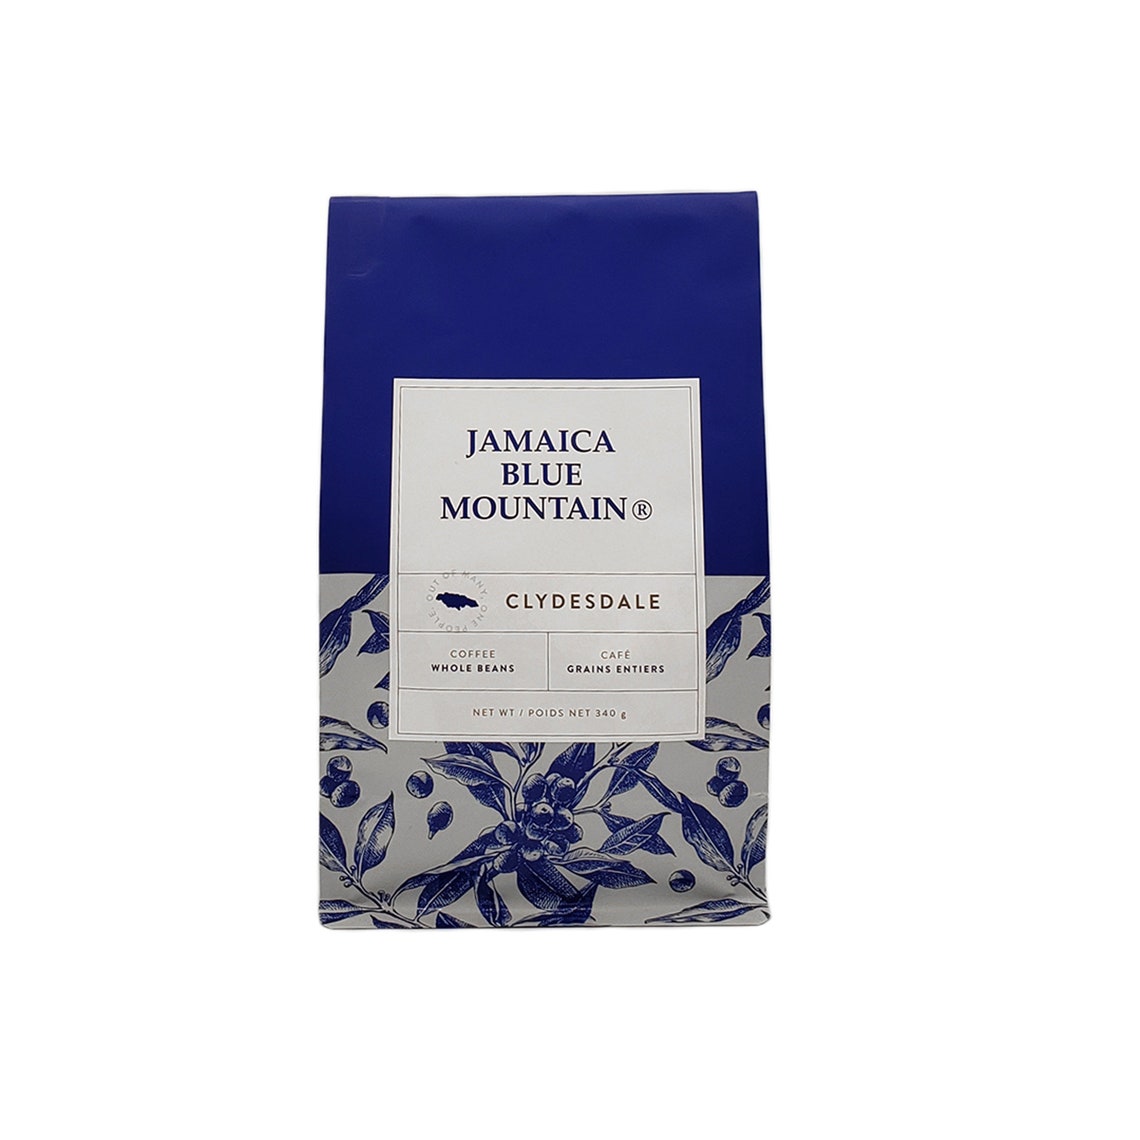 Jamaica Blue Mountain Coffee Clydesdale 340g Whole Beans